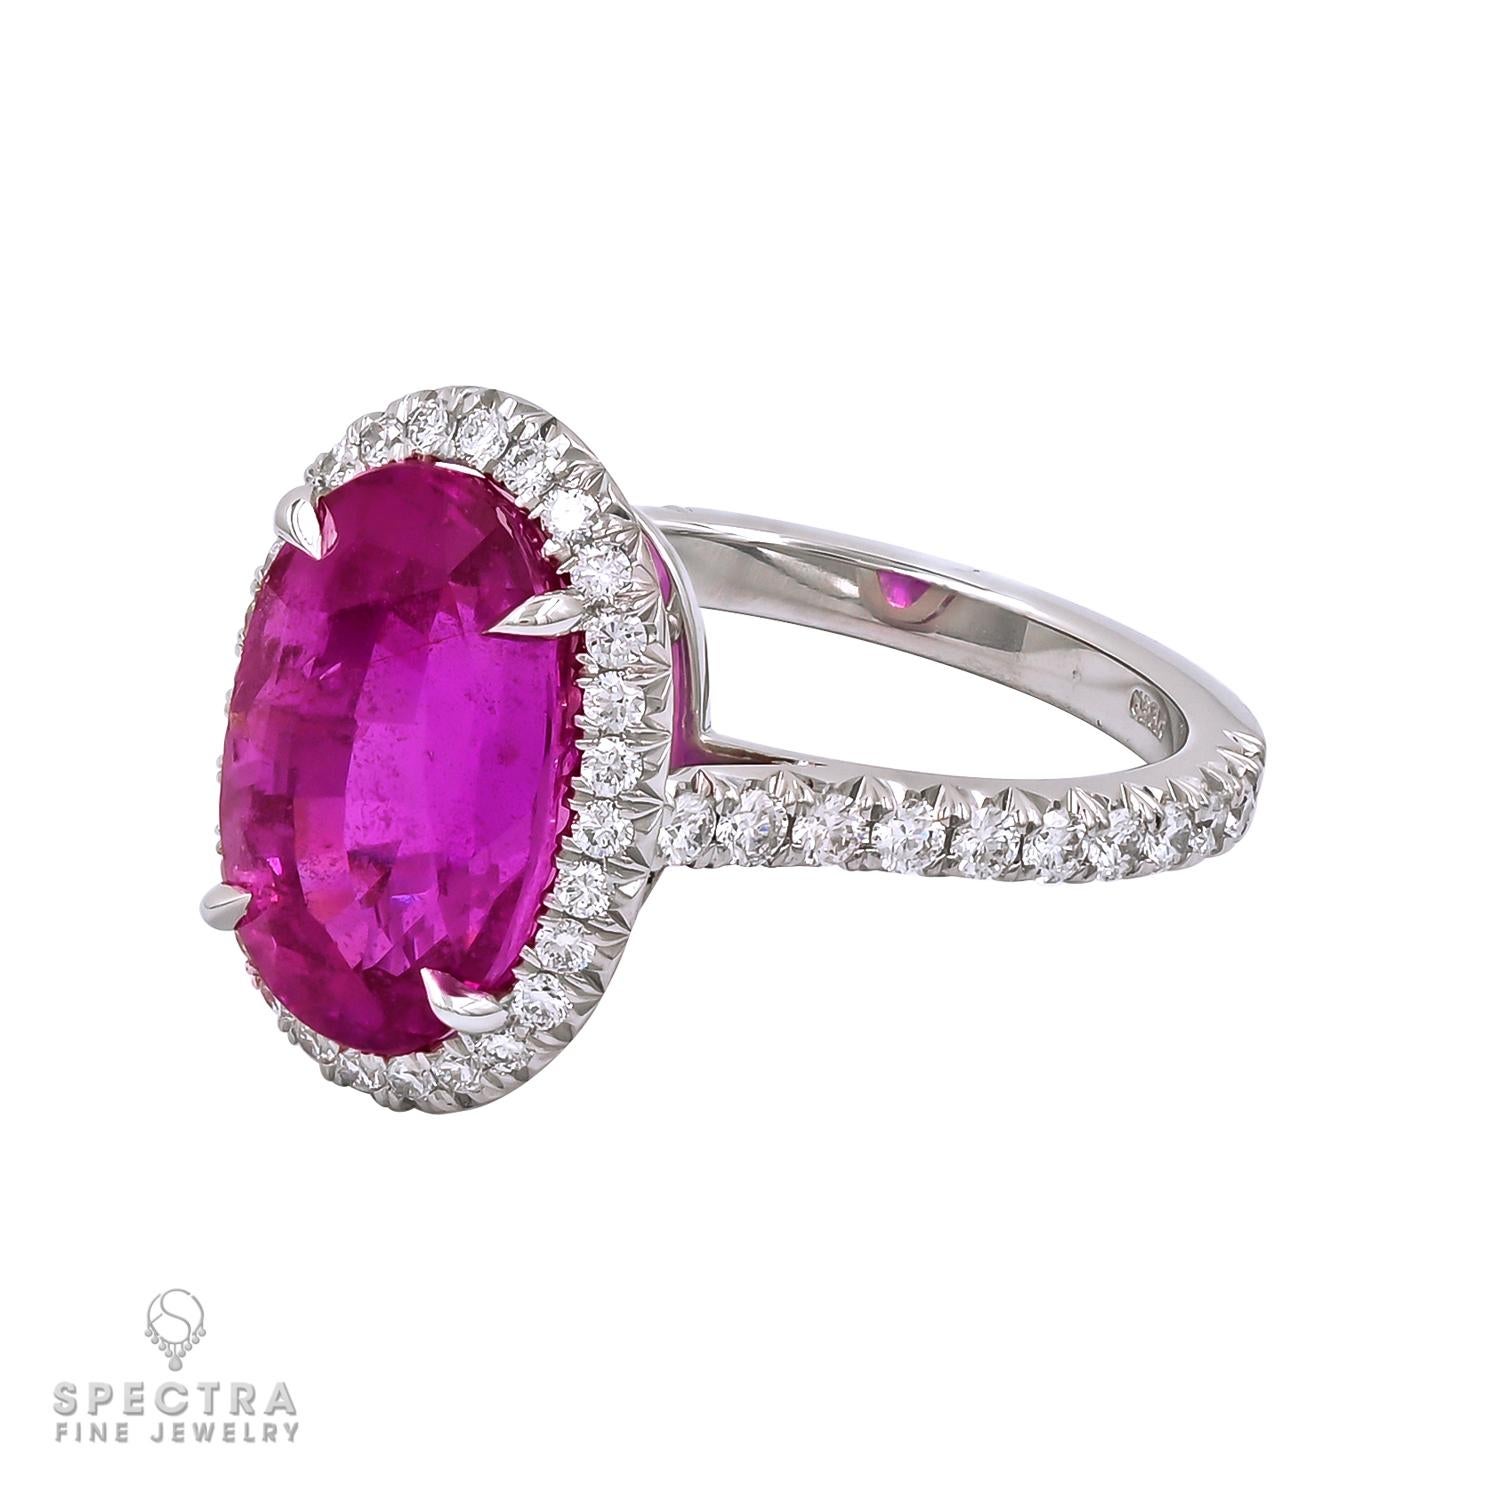 This Contemporary Madagascar Pink Sapphire Diamond Halo Engagement/Cocktail Ring, made by Spectra Fine Jewelry in the 21st century, is crafted from platinum and features an utterly unique oval faceted pink sapphire with an estimated weight of 7.16